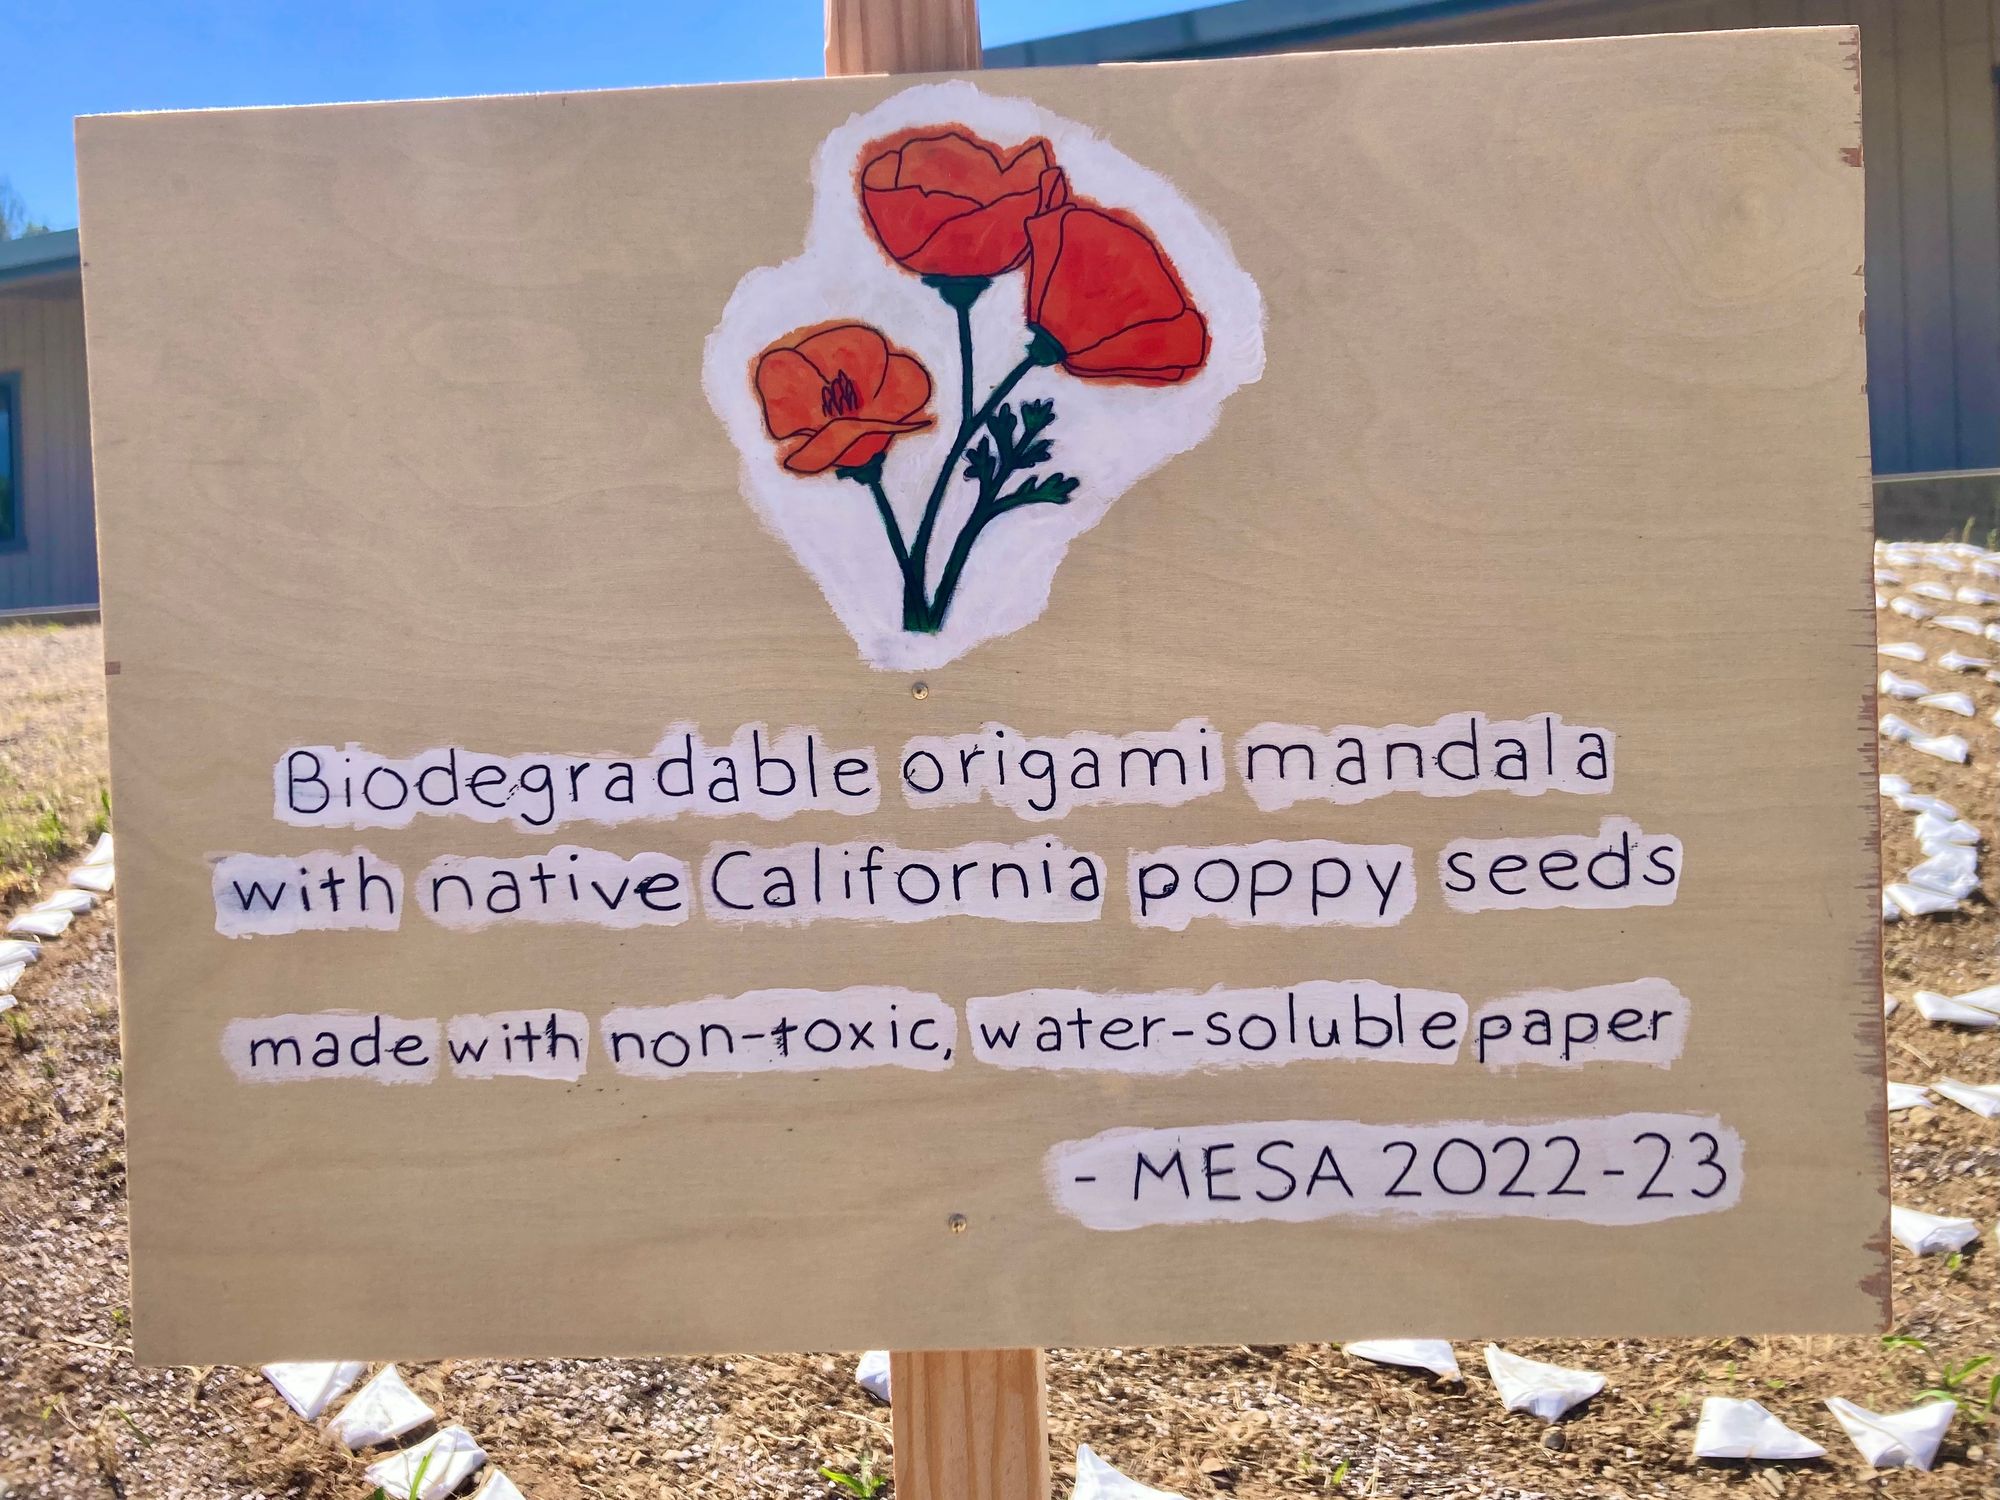 A second math/art project with the 100 high school MESA students. This 2-month project featured a study of radial symmetry, fleeting Tibetan sand mandalas, 1,000 pieces of biodegradable paper, and the California State flower.